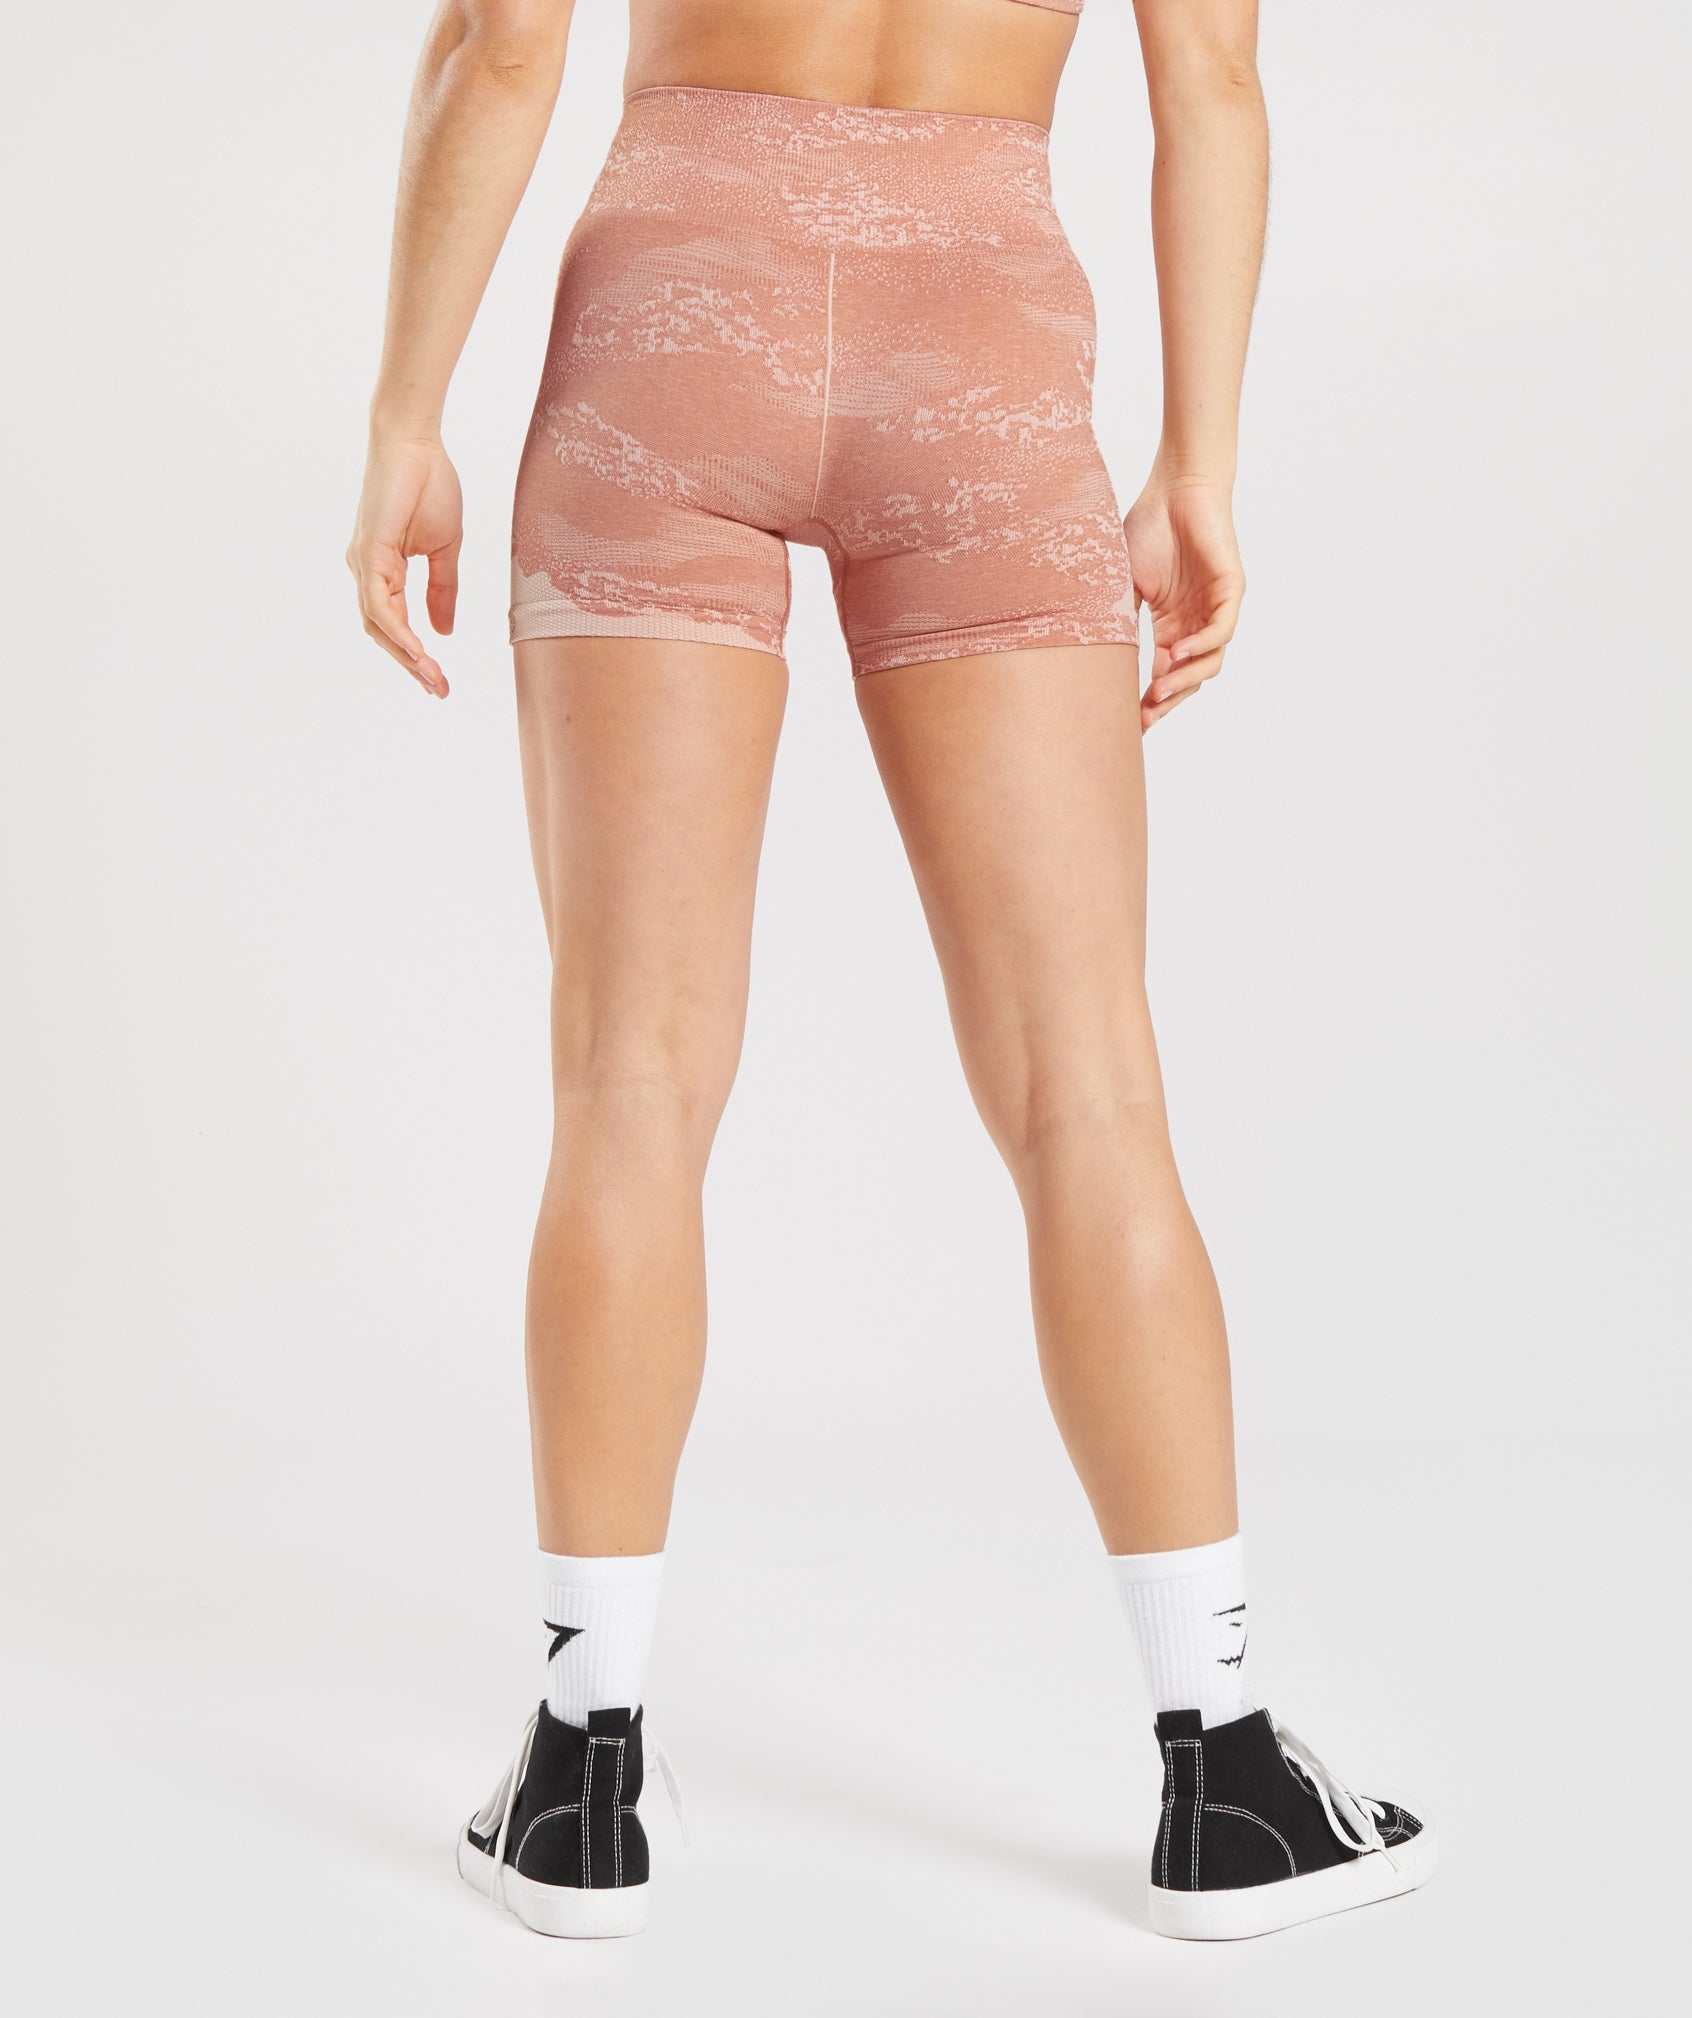 Adapt Camo Seamless Shorts in Misty Pink/Hazy Pink - view 2